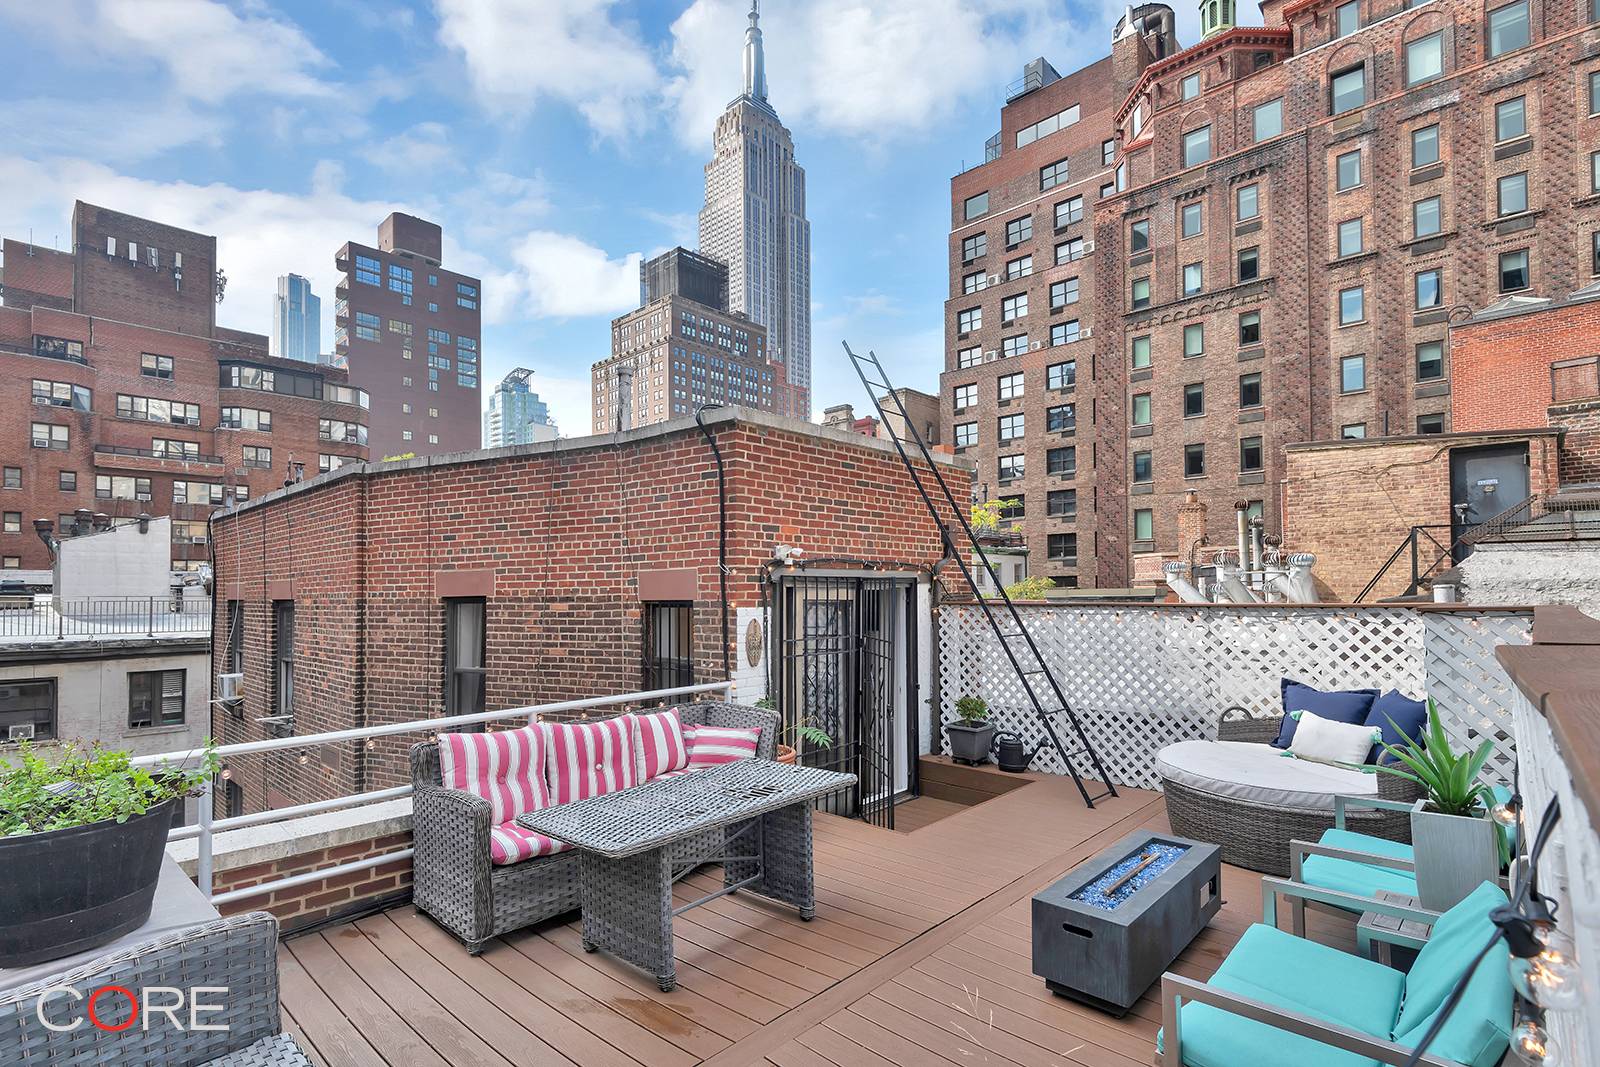 Welcome to your approximately 300 square foot private rooftop deck in this approximately 1, 200 square foot one bedroom convertible two bedroom duplex with home office.